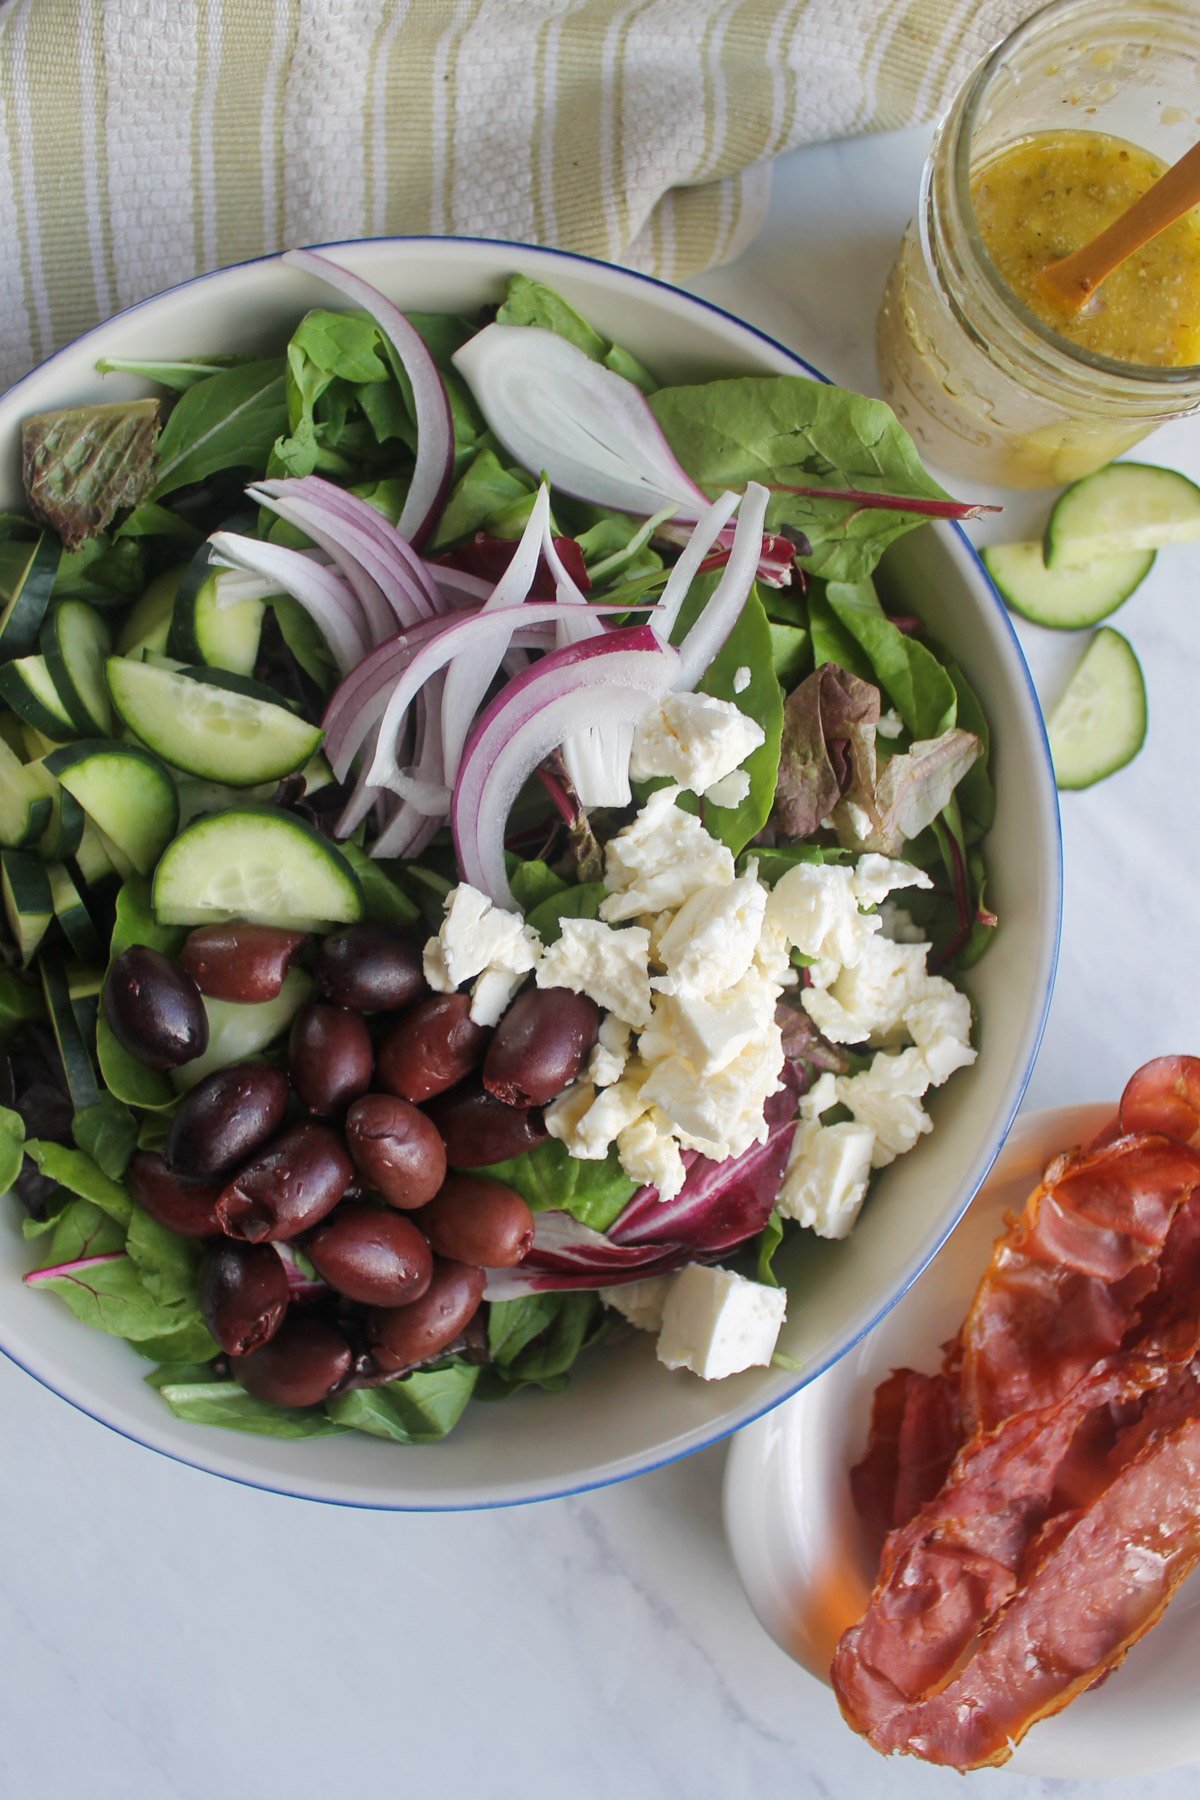 Italian salad assembled with mixed greens, cucumber, red onion, feta and kalamata olives piled on.